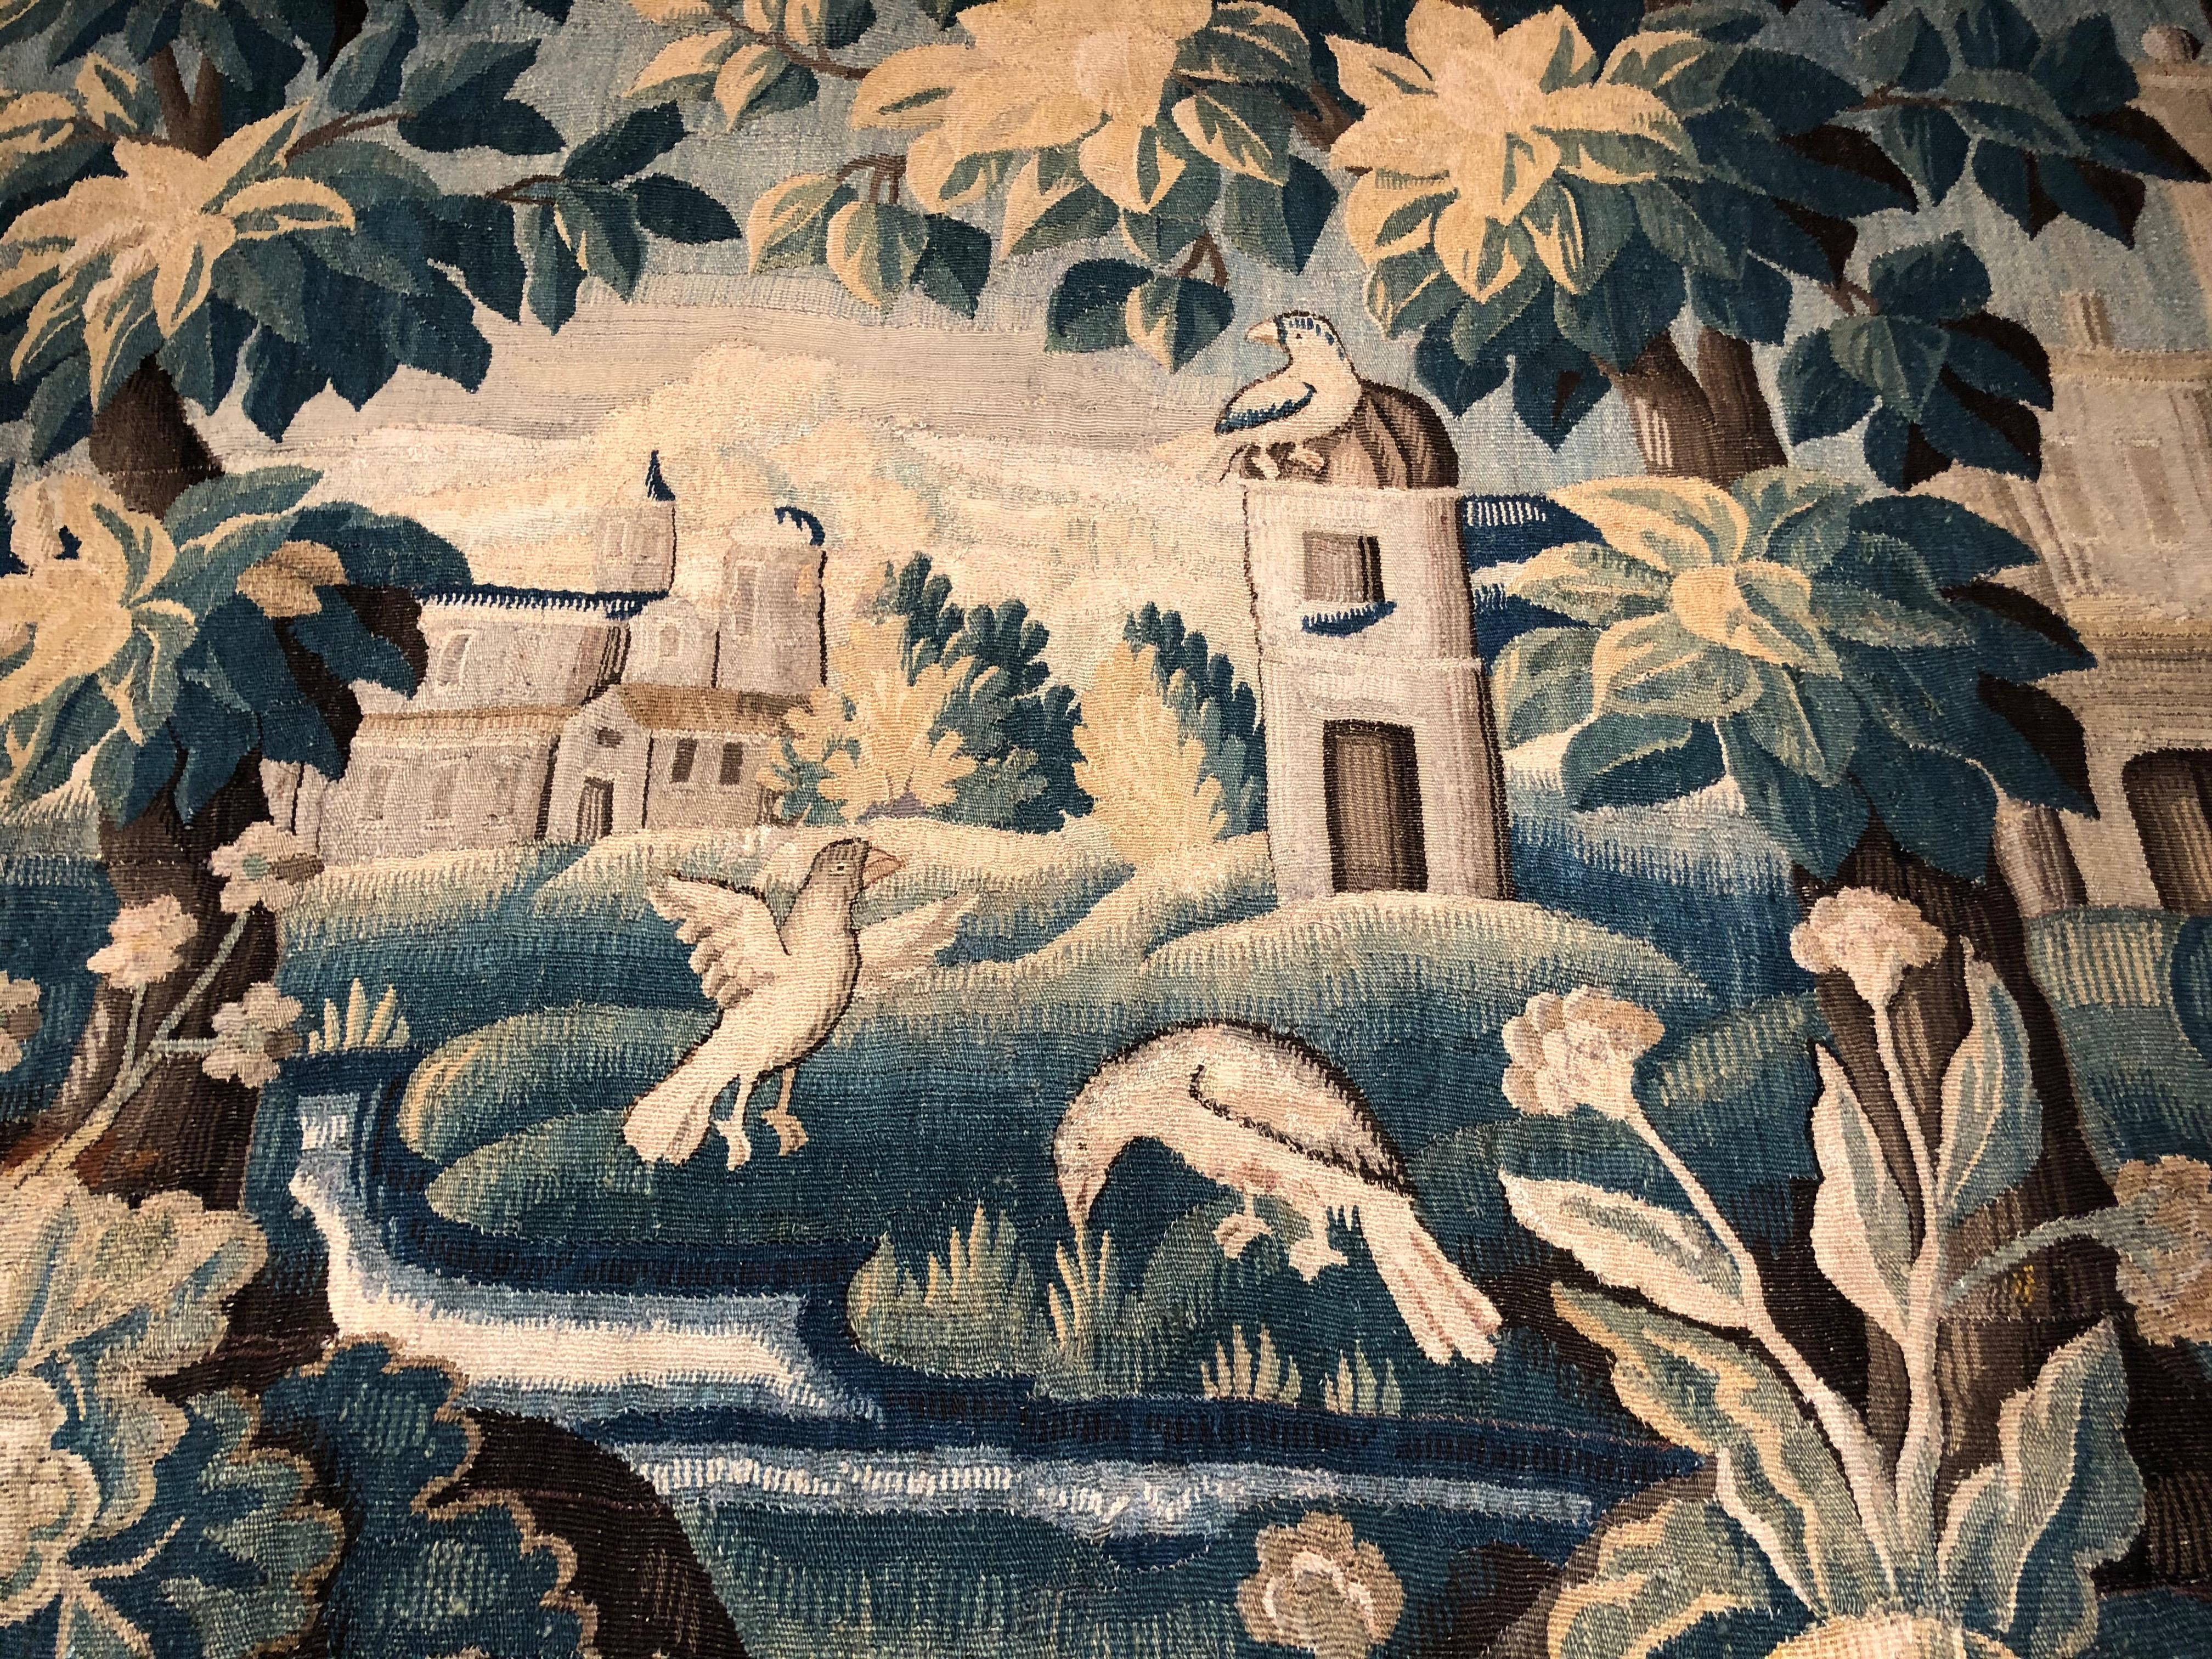 French, 18th century Verdure Aubusson tapestry handwoven in wool with silk highlights framed with a complete floral border. Two birds wade aside a winding stream in this scenic landscape with an ancient town in the rear, while the main focus of this